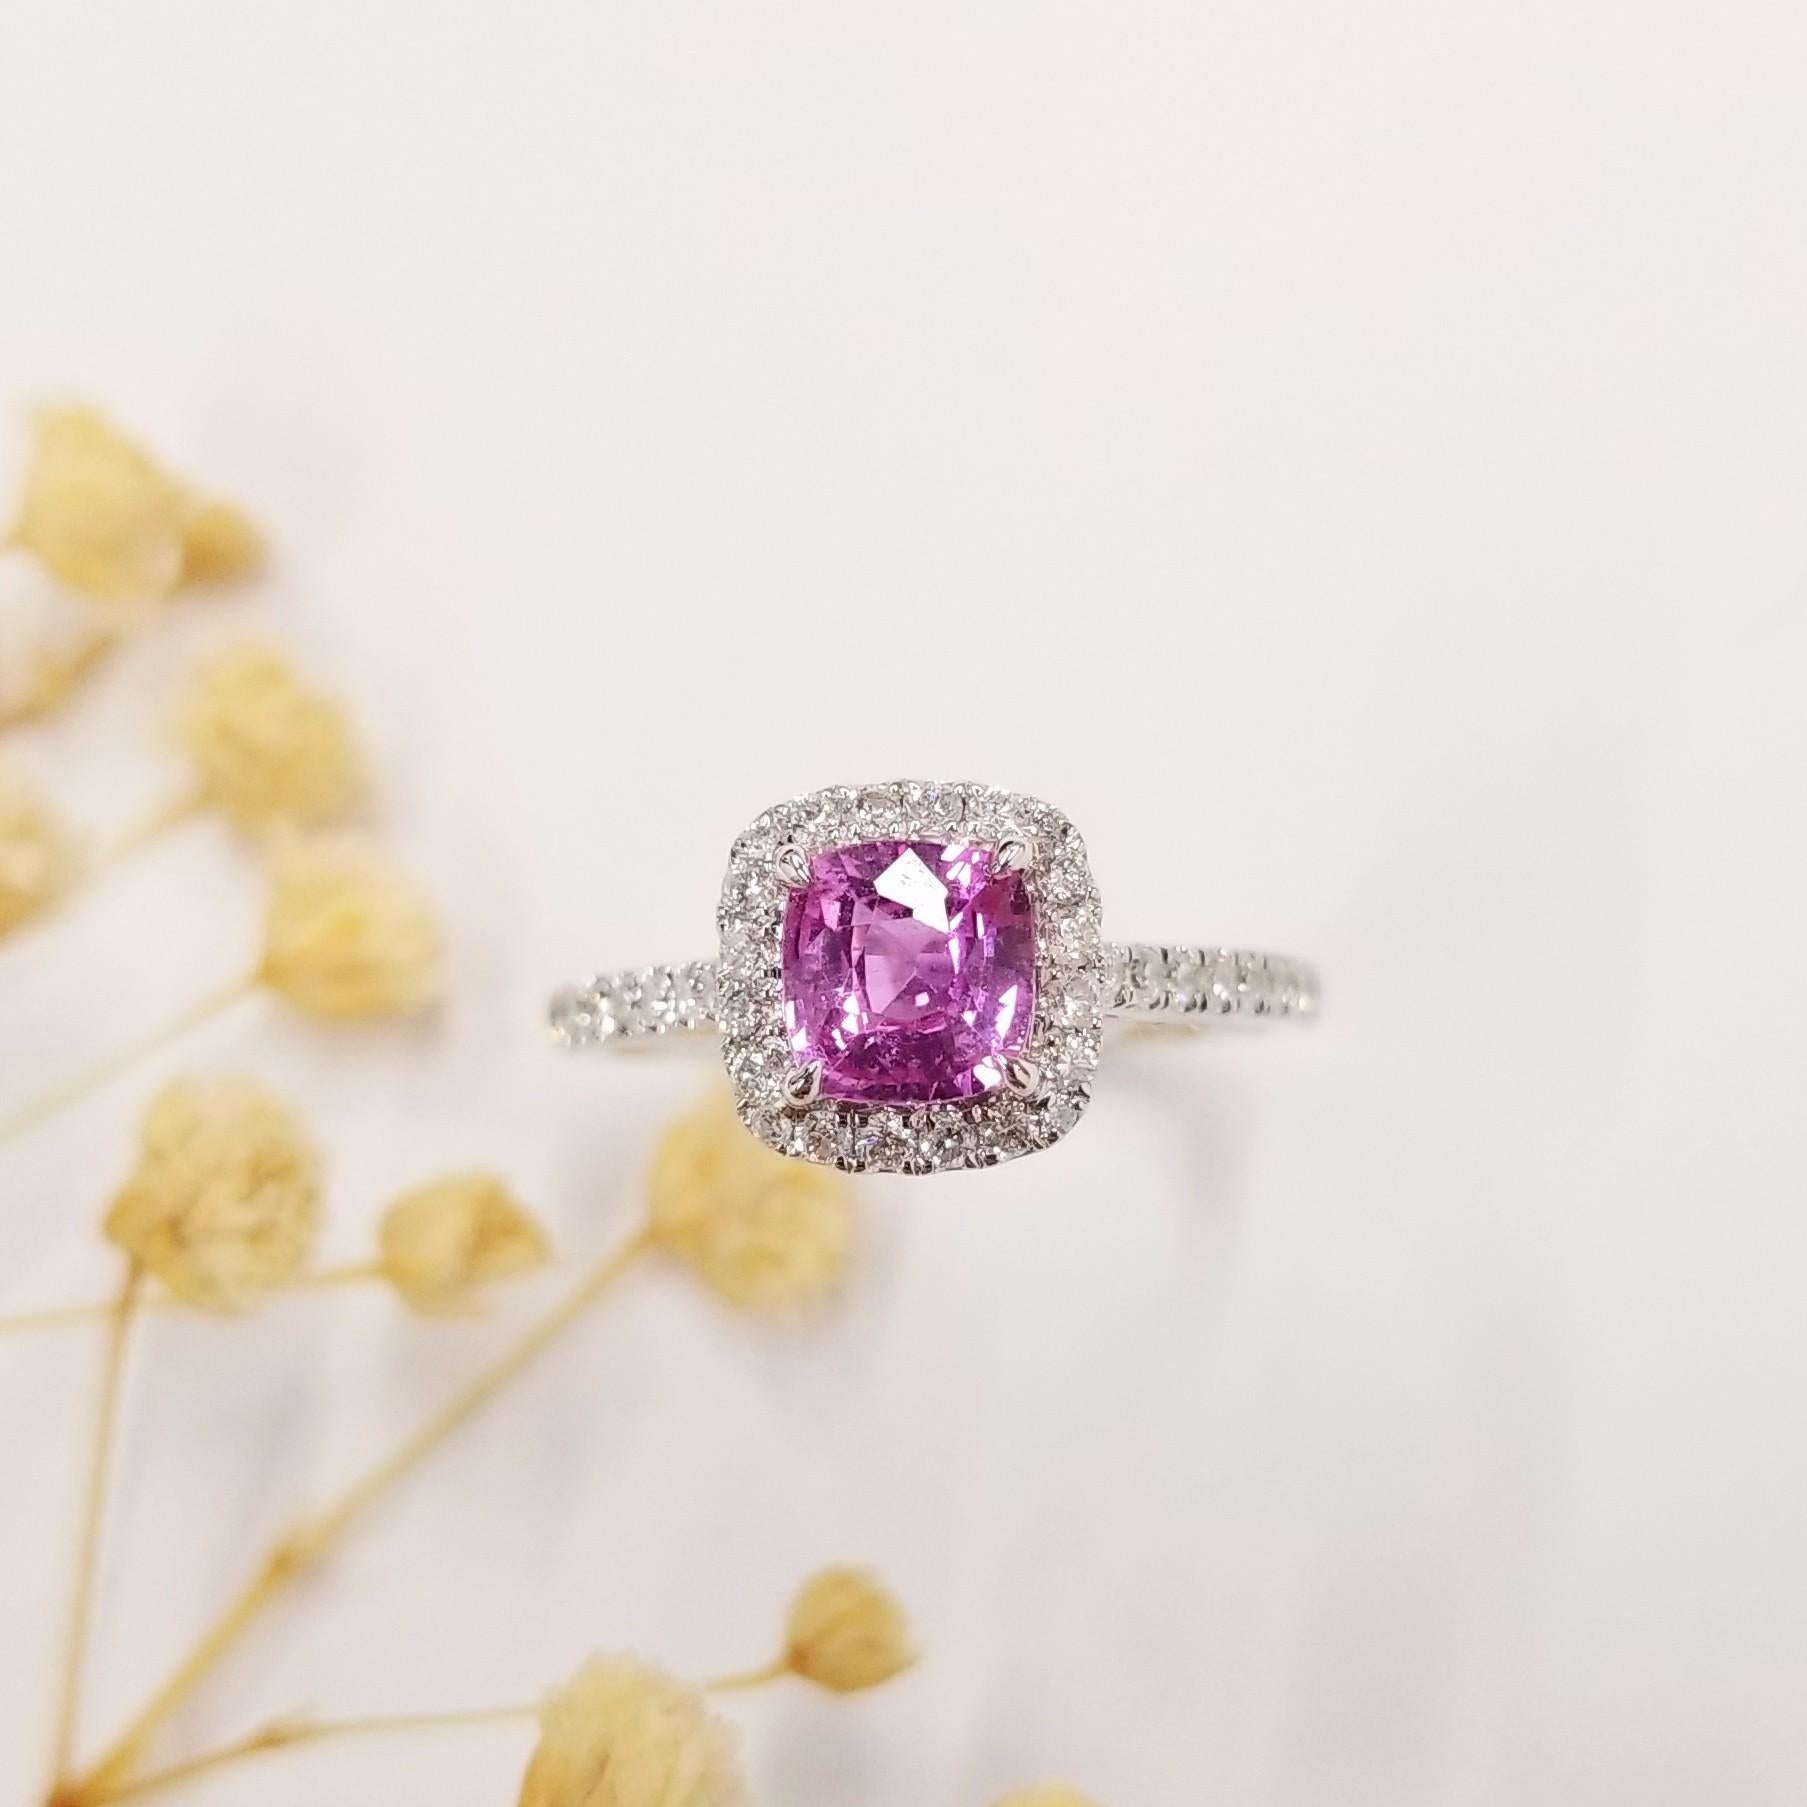 Crafted meticulously in 18K white gold, this exquisite ring exudes elegance and sophistication, making it a perfect addition to any jewelry collection.

Central to this captivating ring is a mesmerizing 0.90 Carat intense purplish pink natural